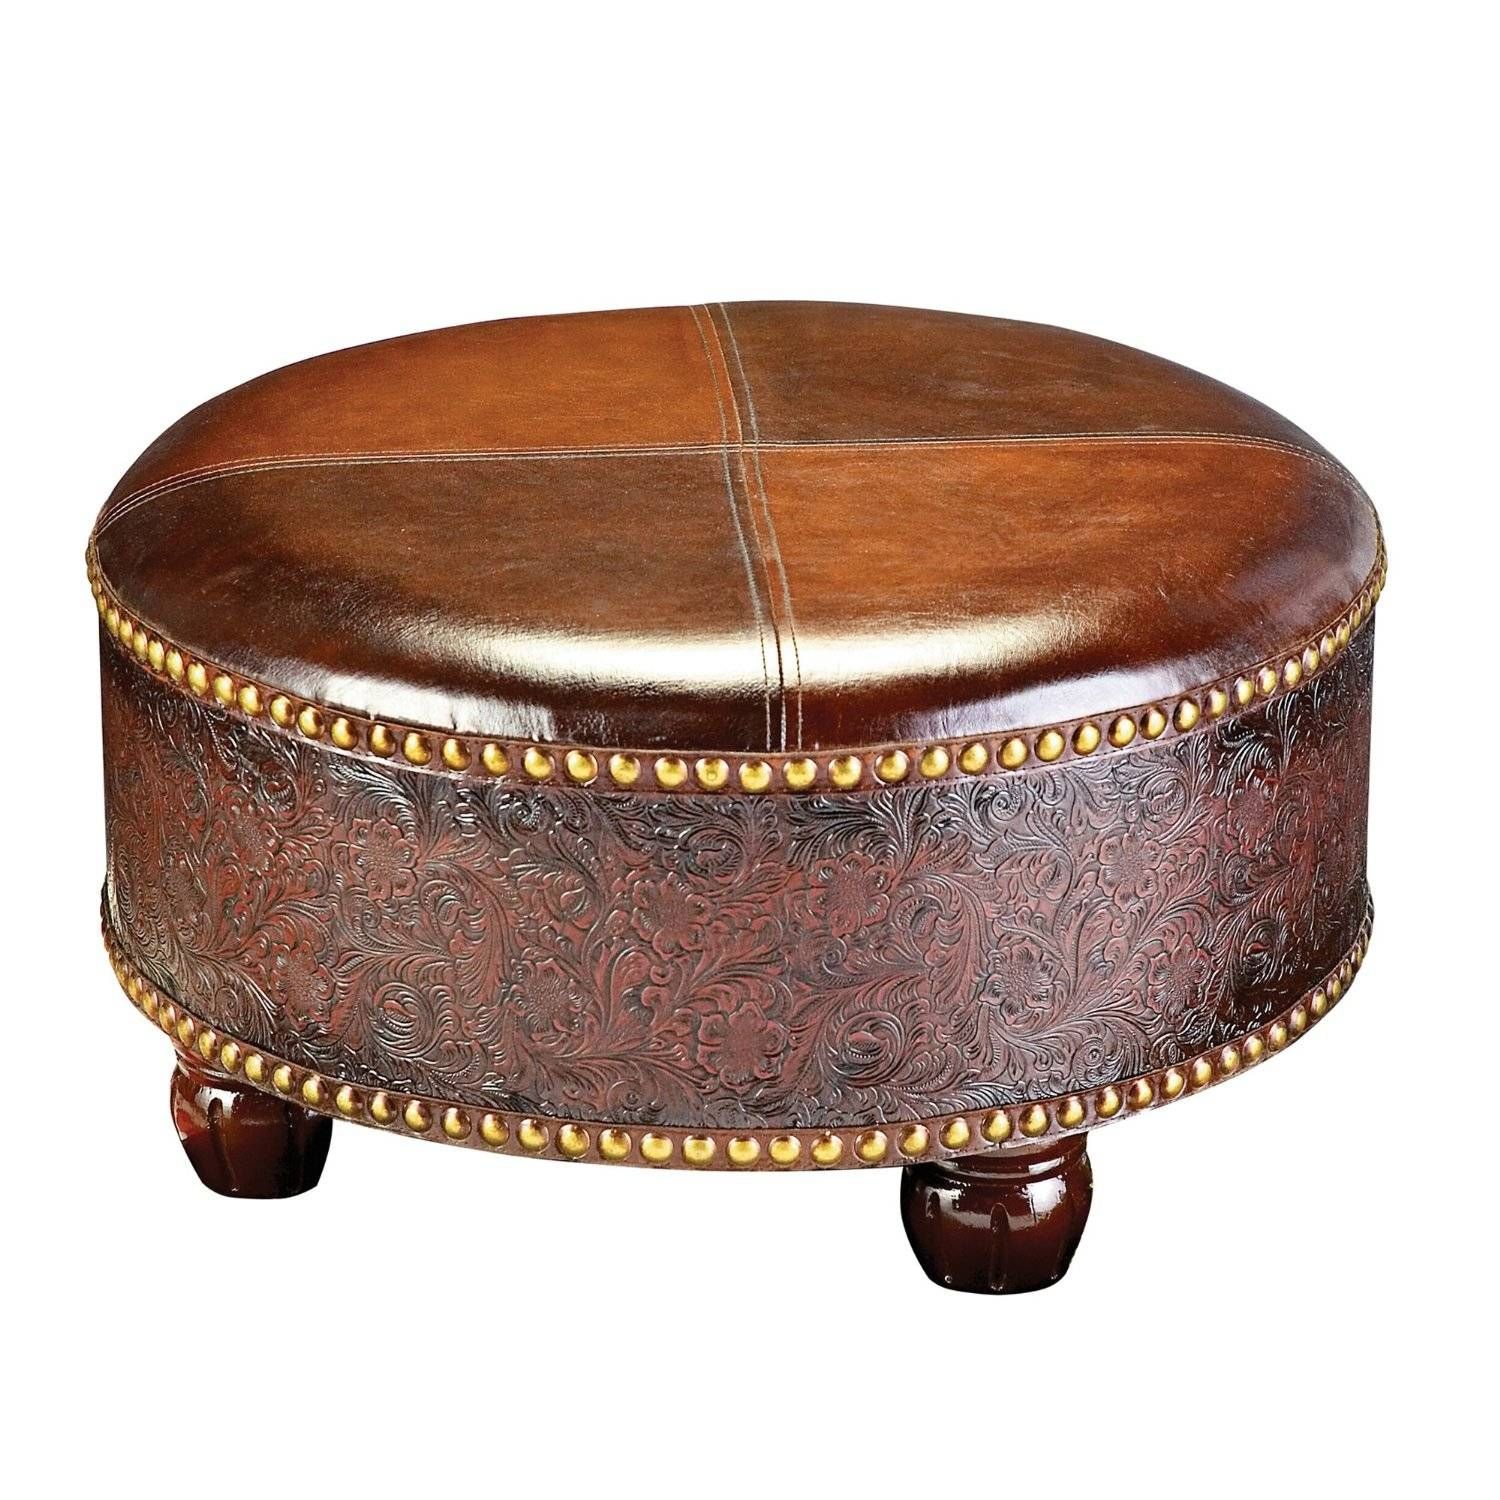 Decoration Round Leather Ottoman Coffee Table Designs Idea Pertaining To Oversized Round Coffee Tables (View 20 of 30)